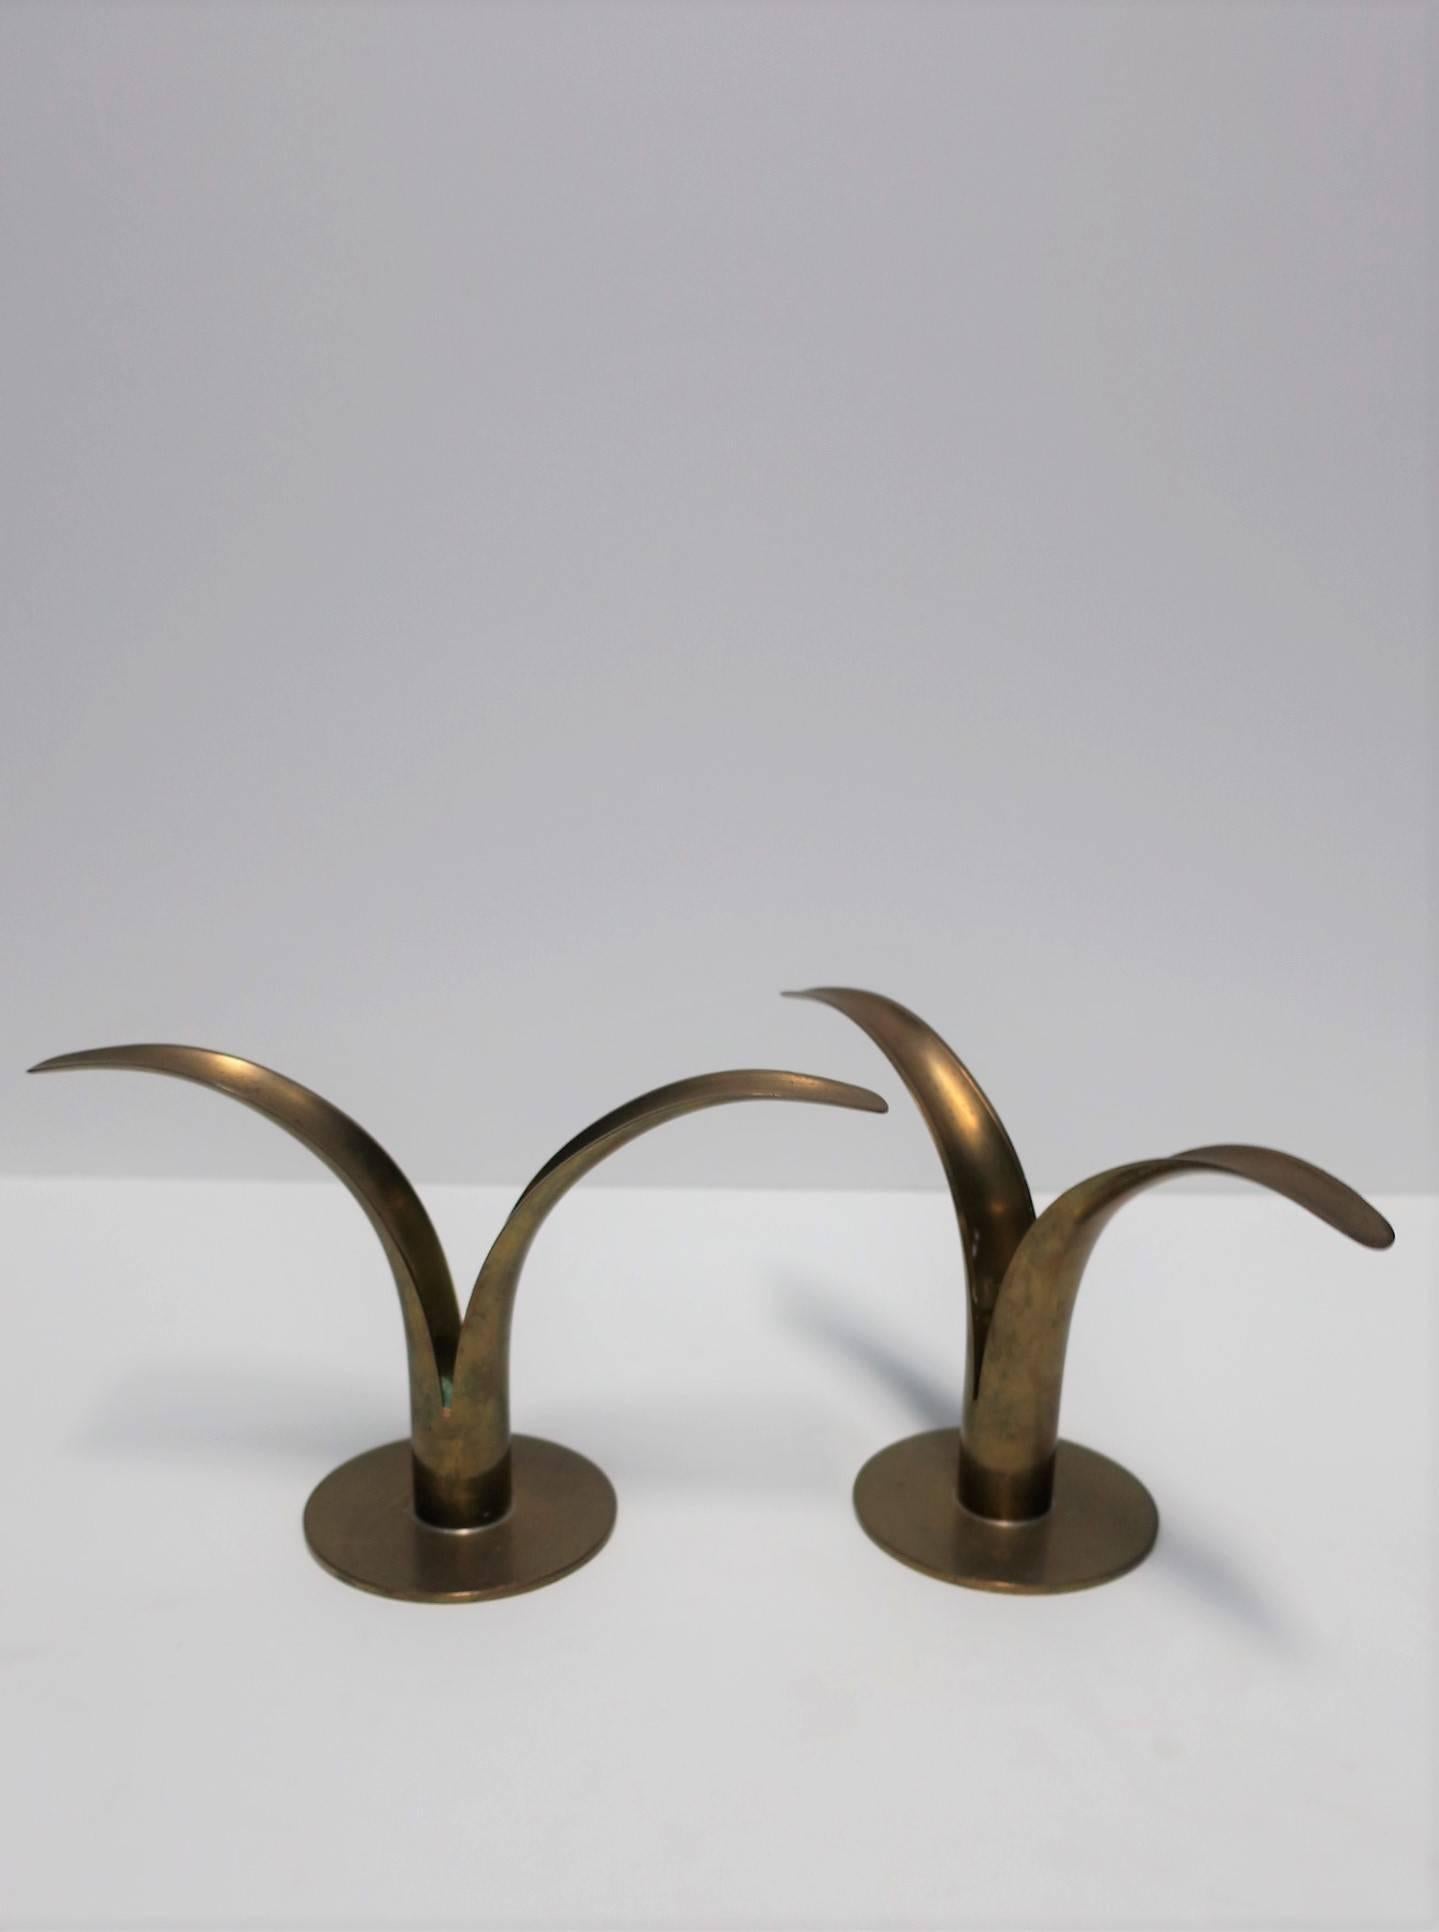 A pair of iconic Scandinavian Modern brass candlesticks designed by Ivar Alenius-Bjork for Ystad Metall of Sweden, circa mid-20th century, Sweden. With designers mark and maker's mark on bottom as show in image #8. Pair shown unpolished with